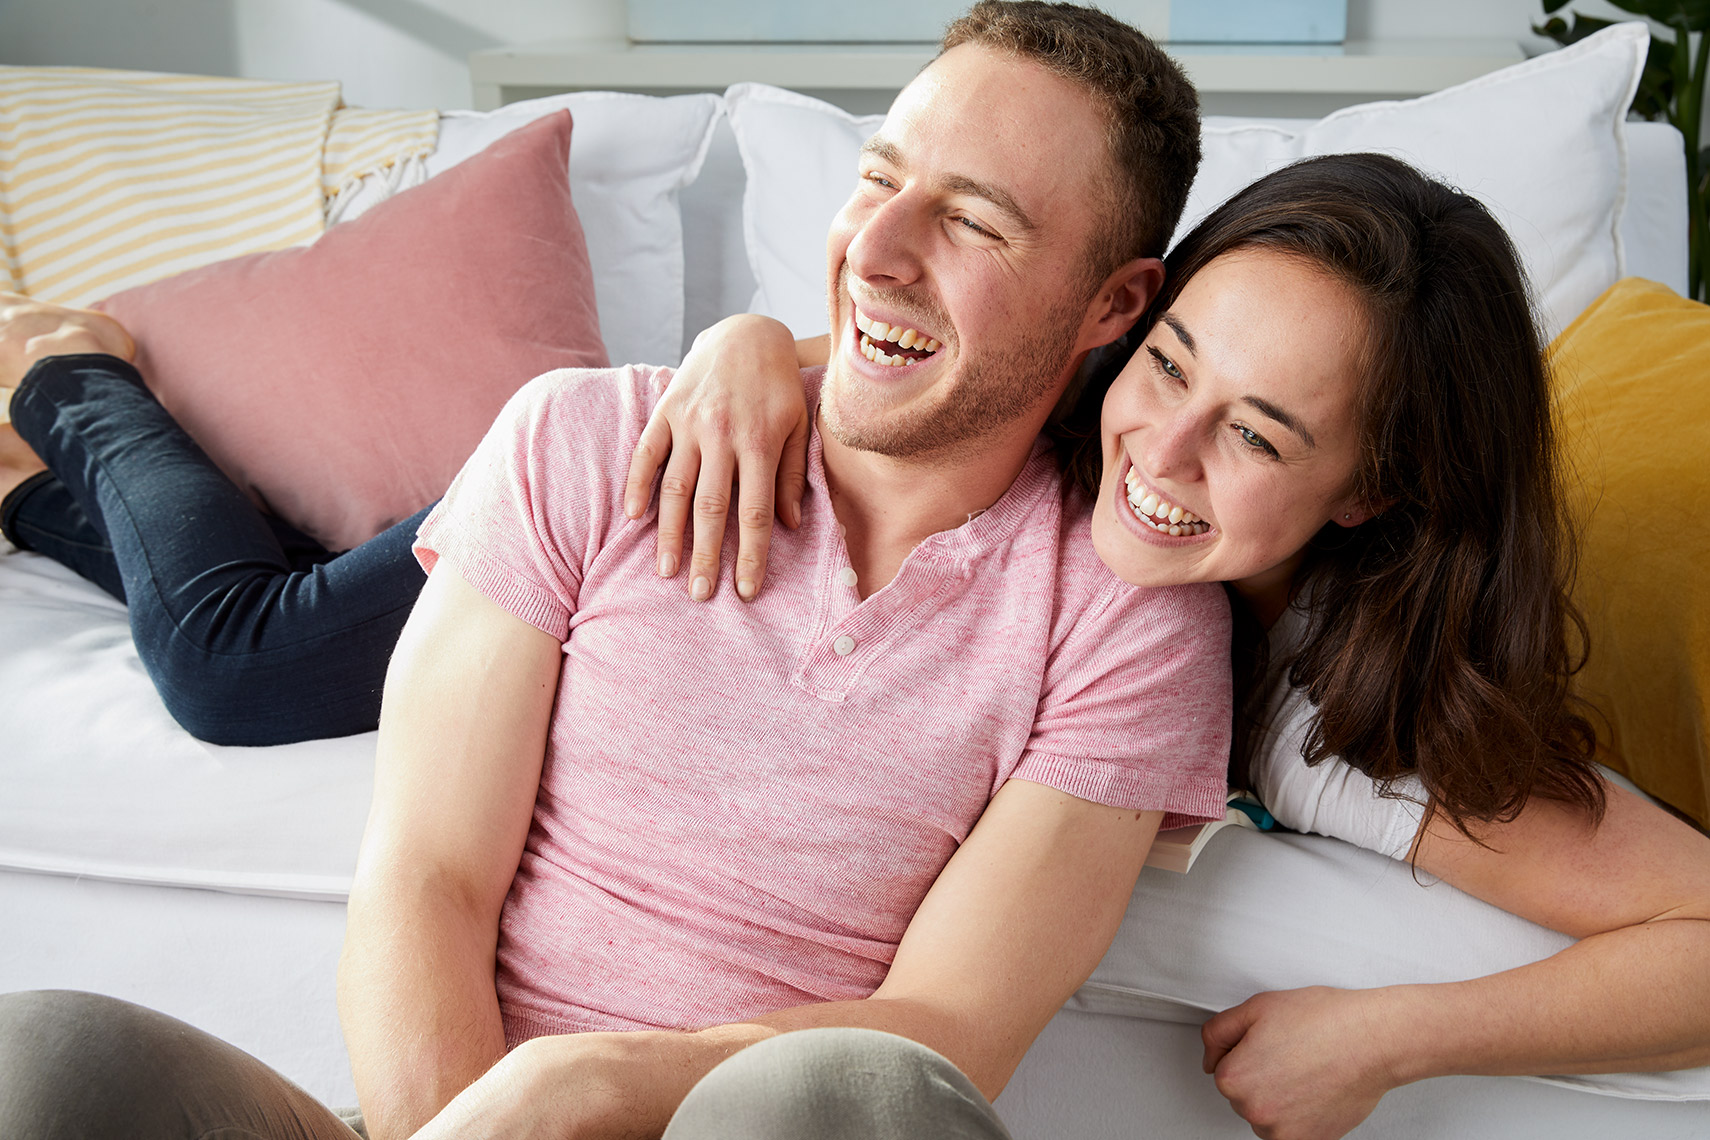 Young man and woman leaning on each other and laughing on the couch.